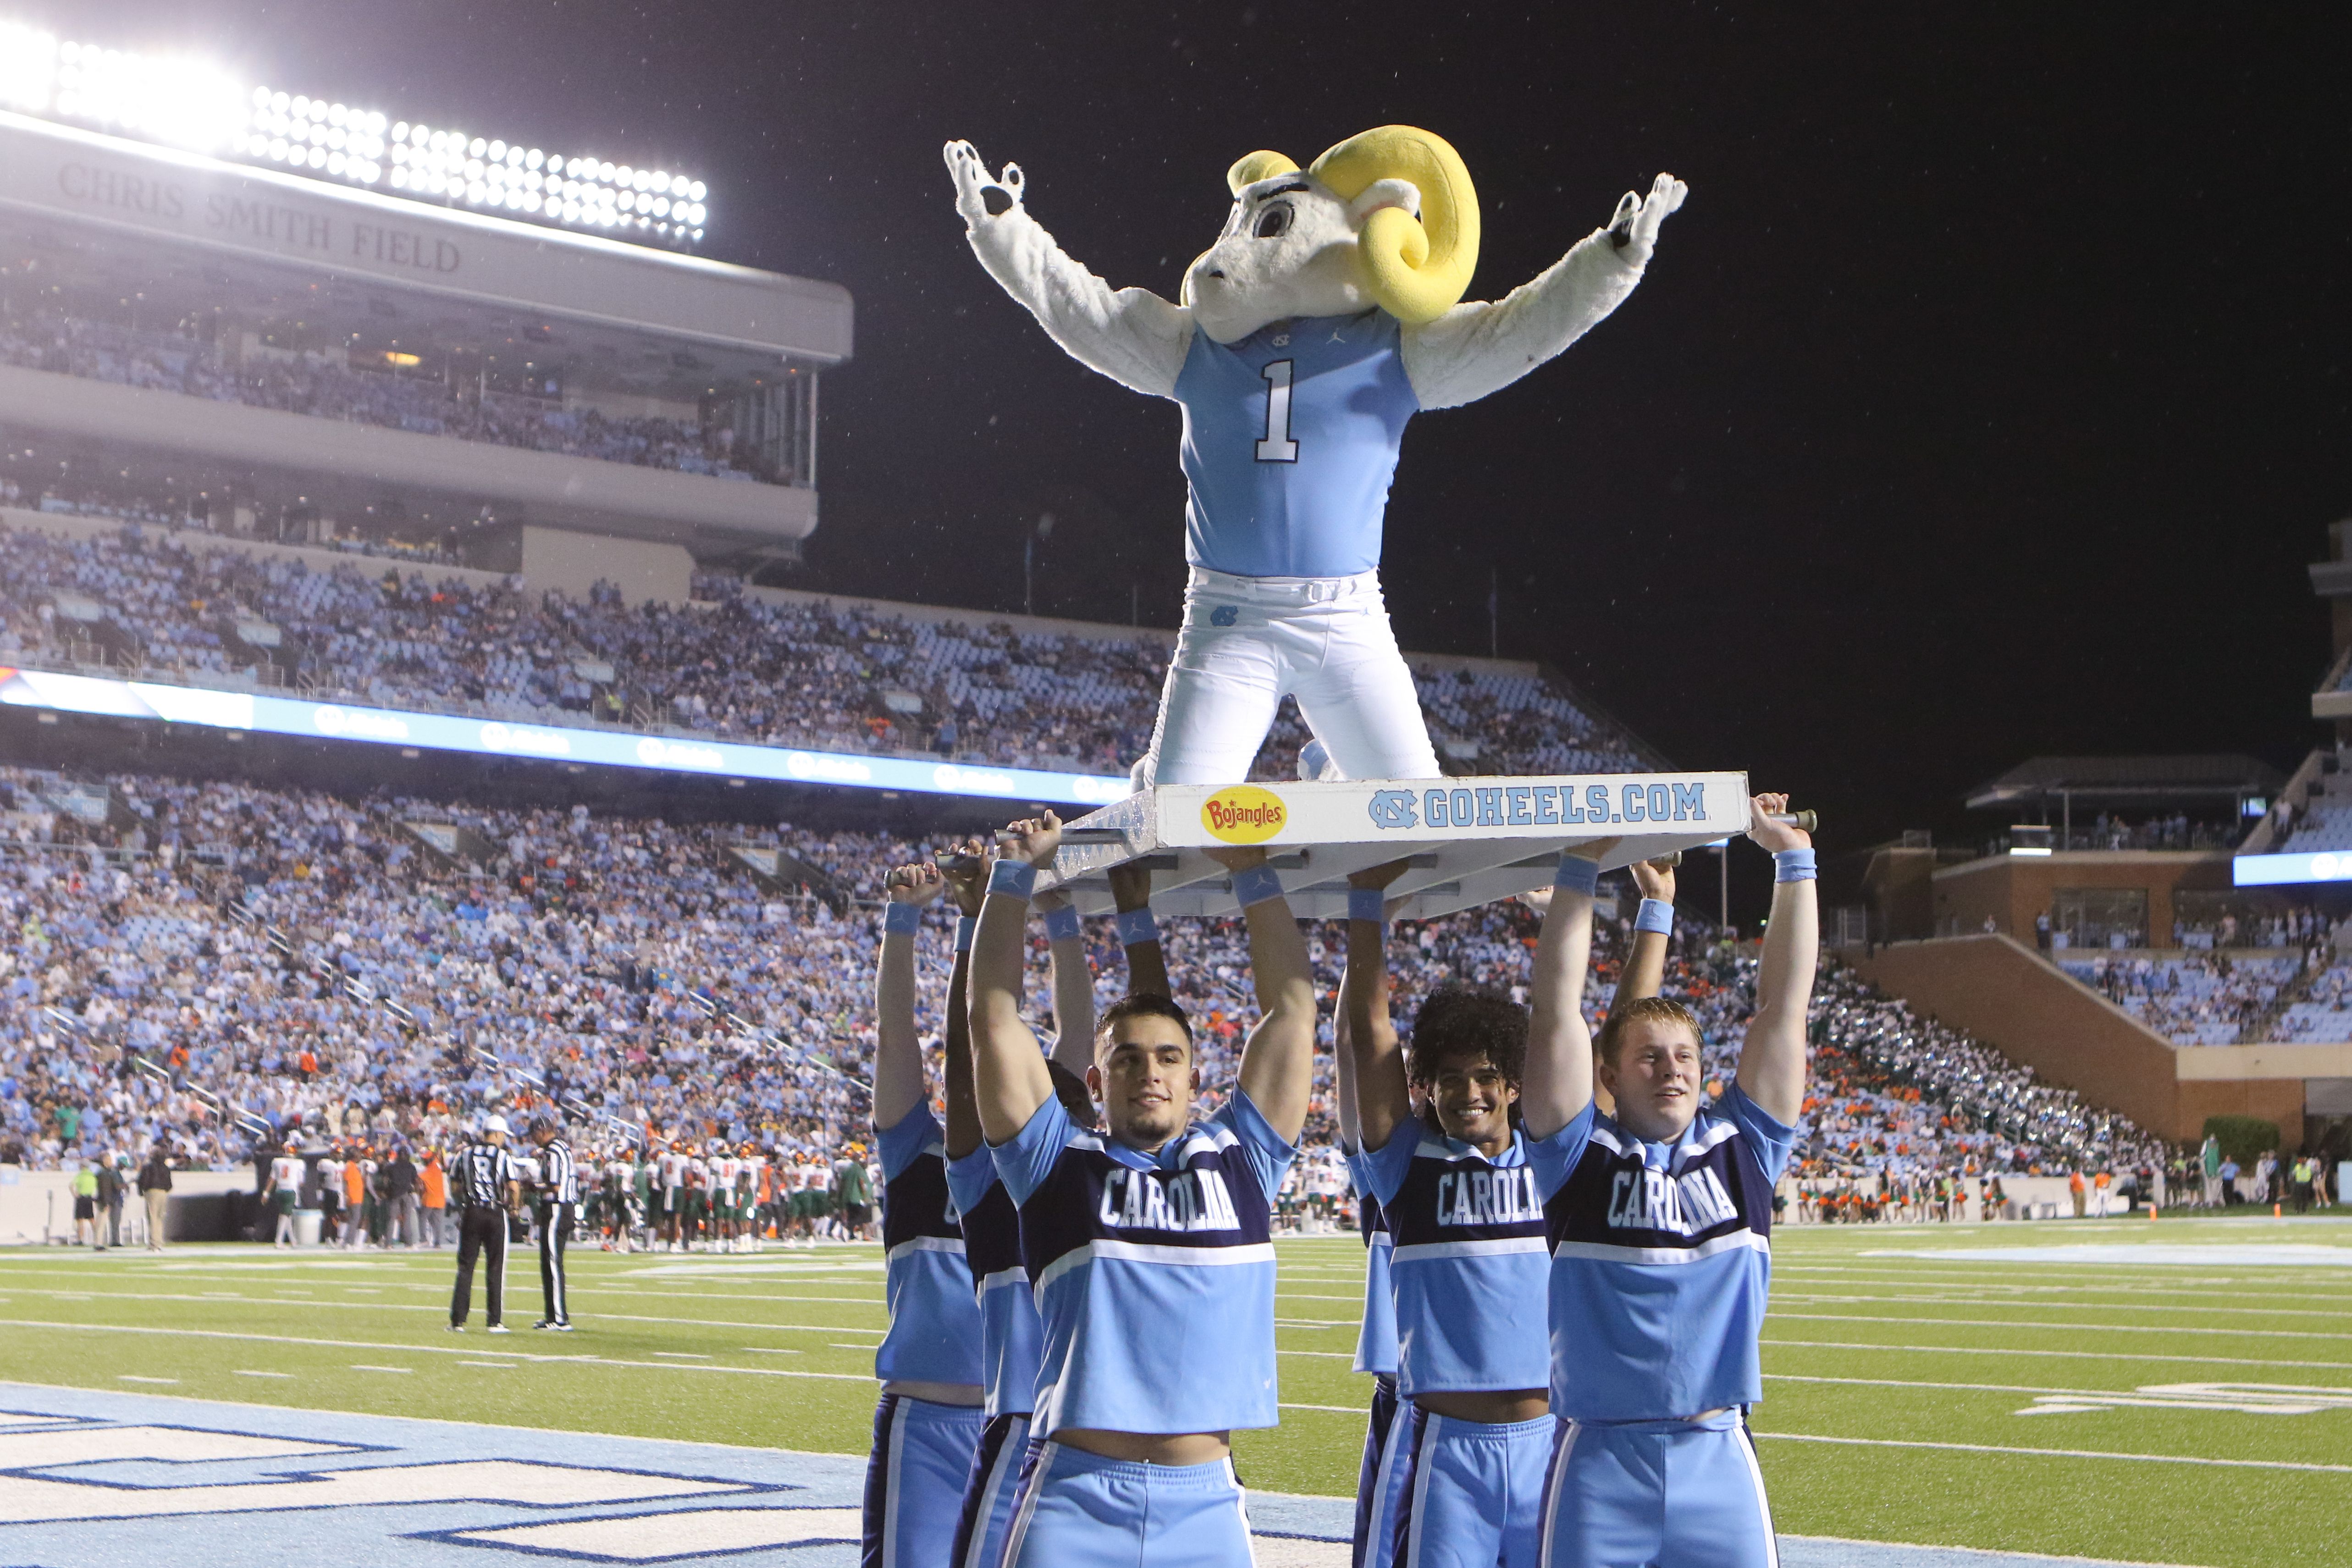 unc football cheerleaders and mascot posing on the field